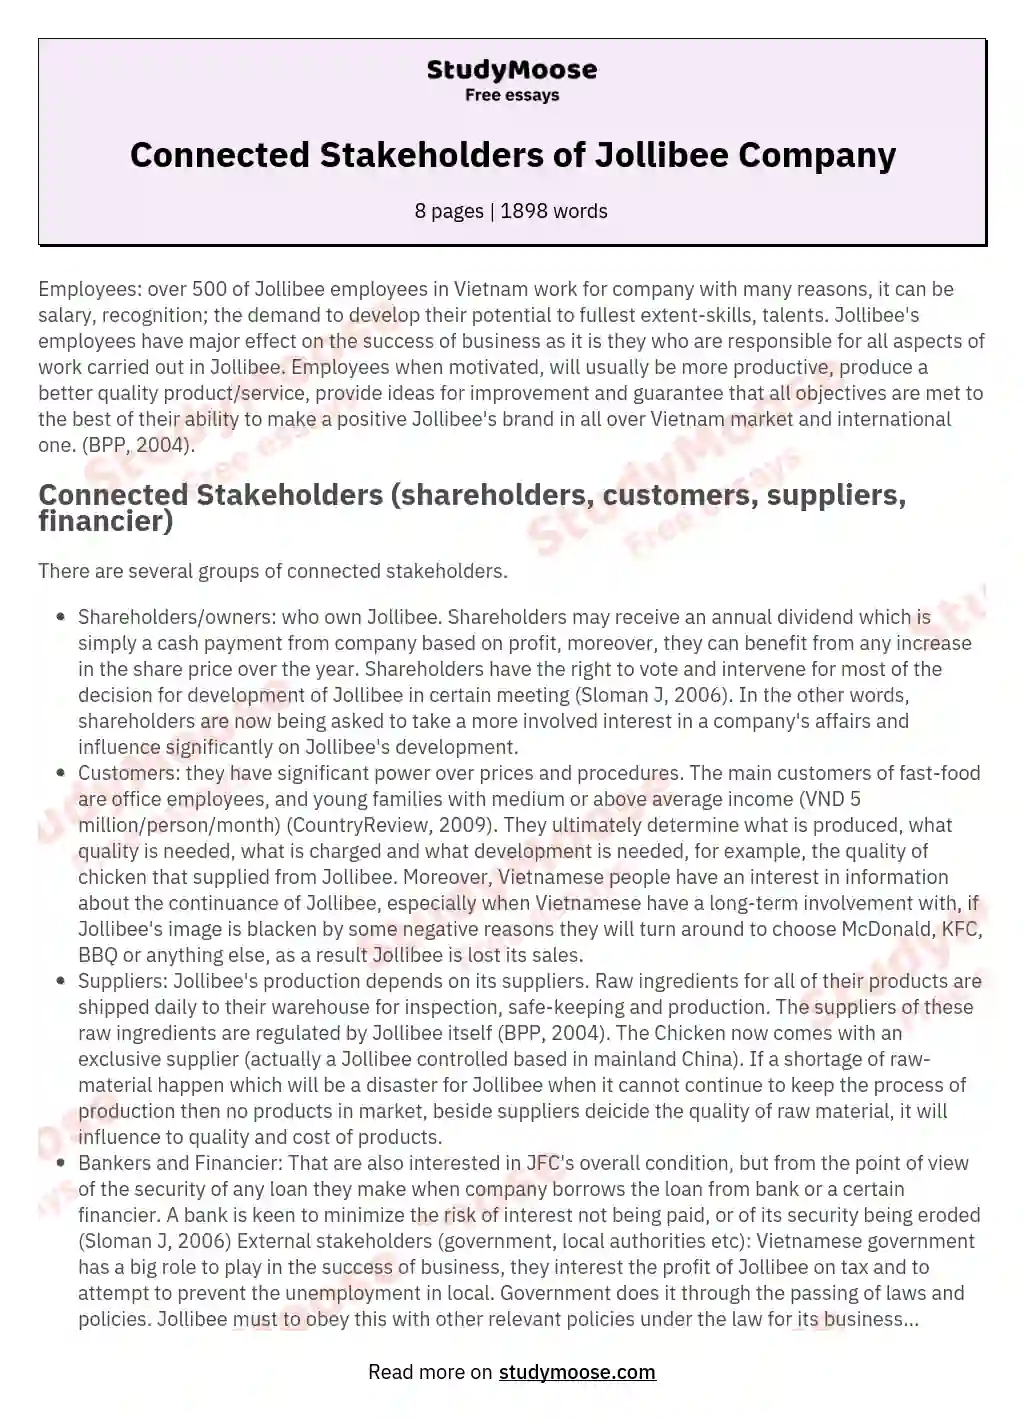 Connected Stakeholders of Jollibee Company essay